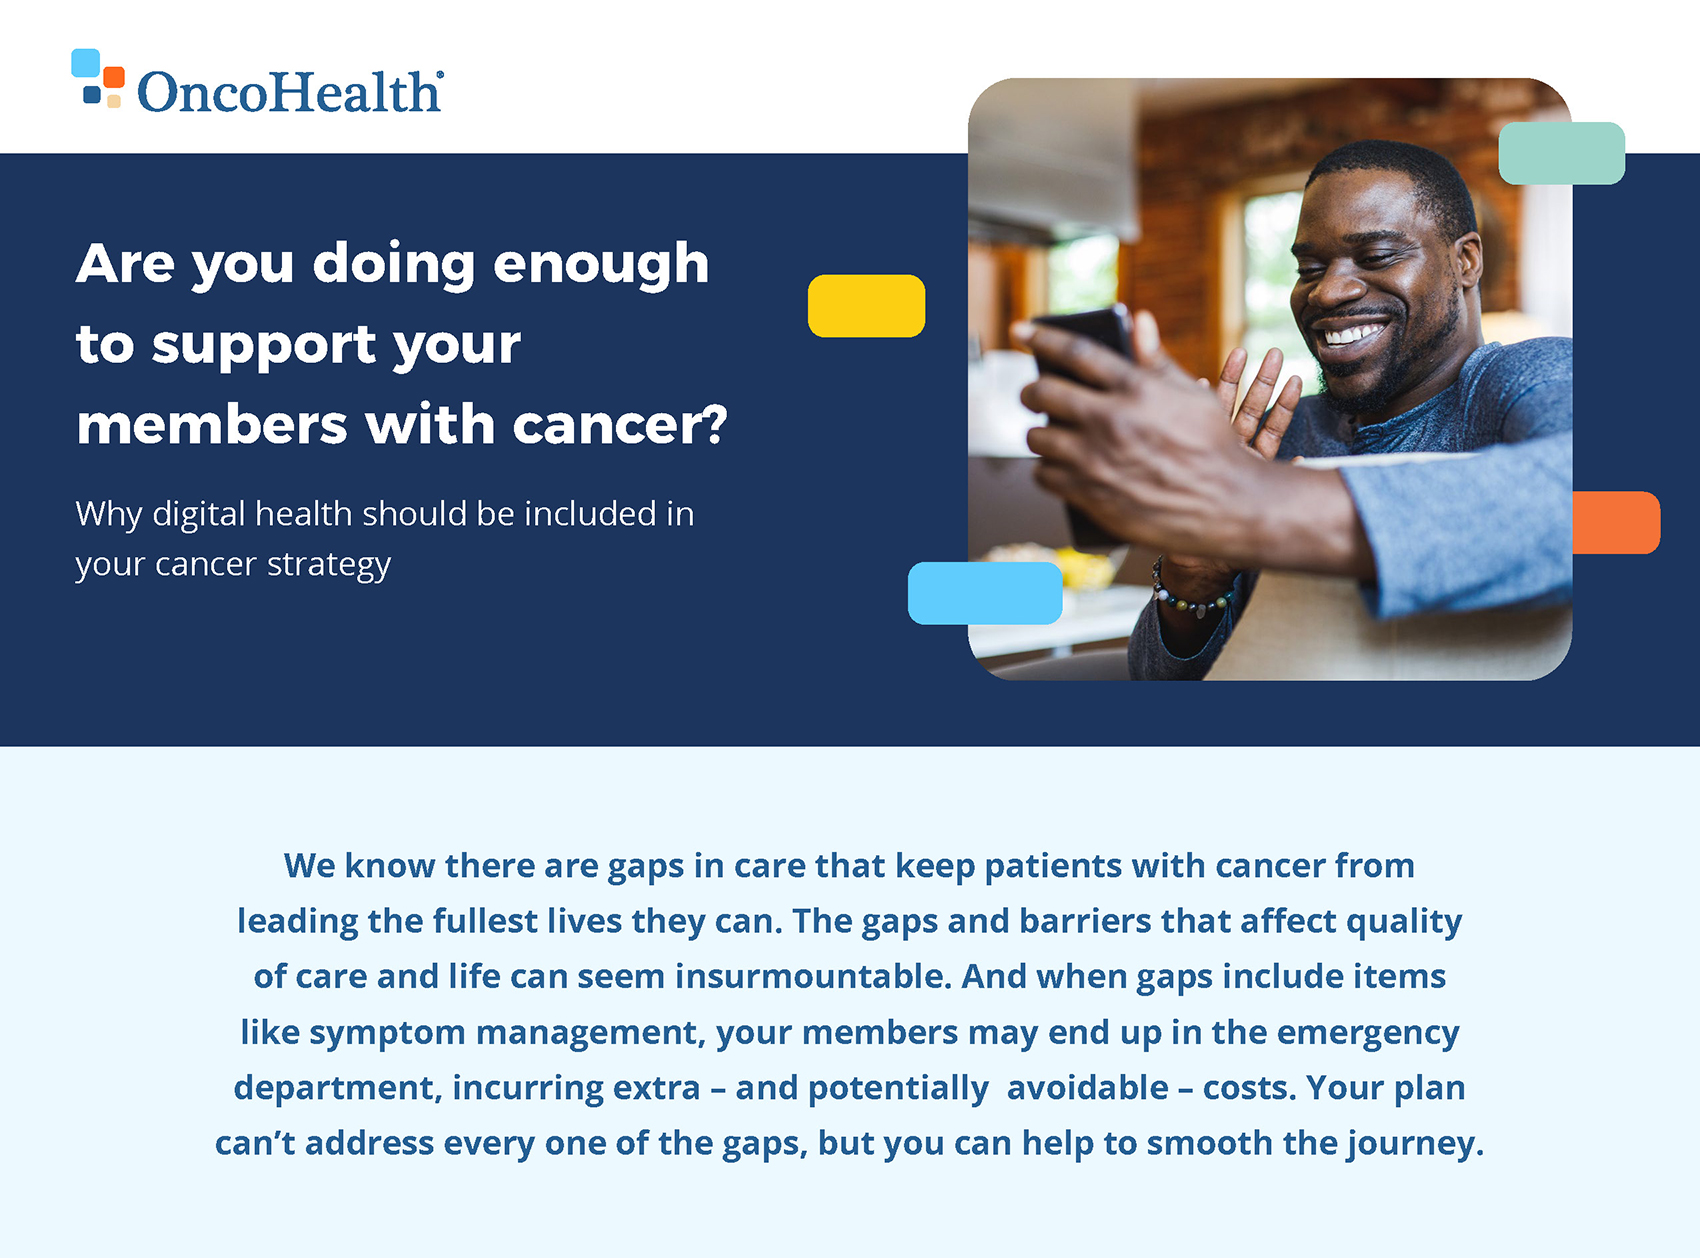 Does your Cancer UM Strategy Include Digital Health?